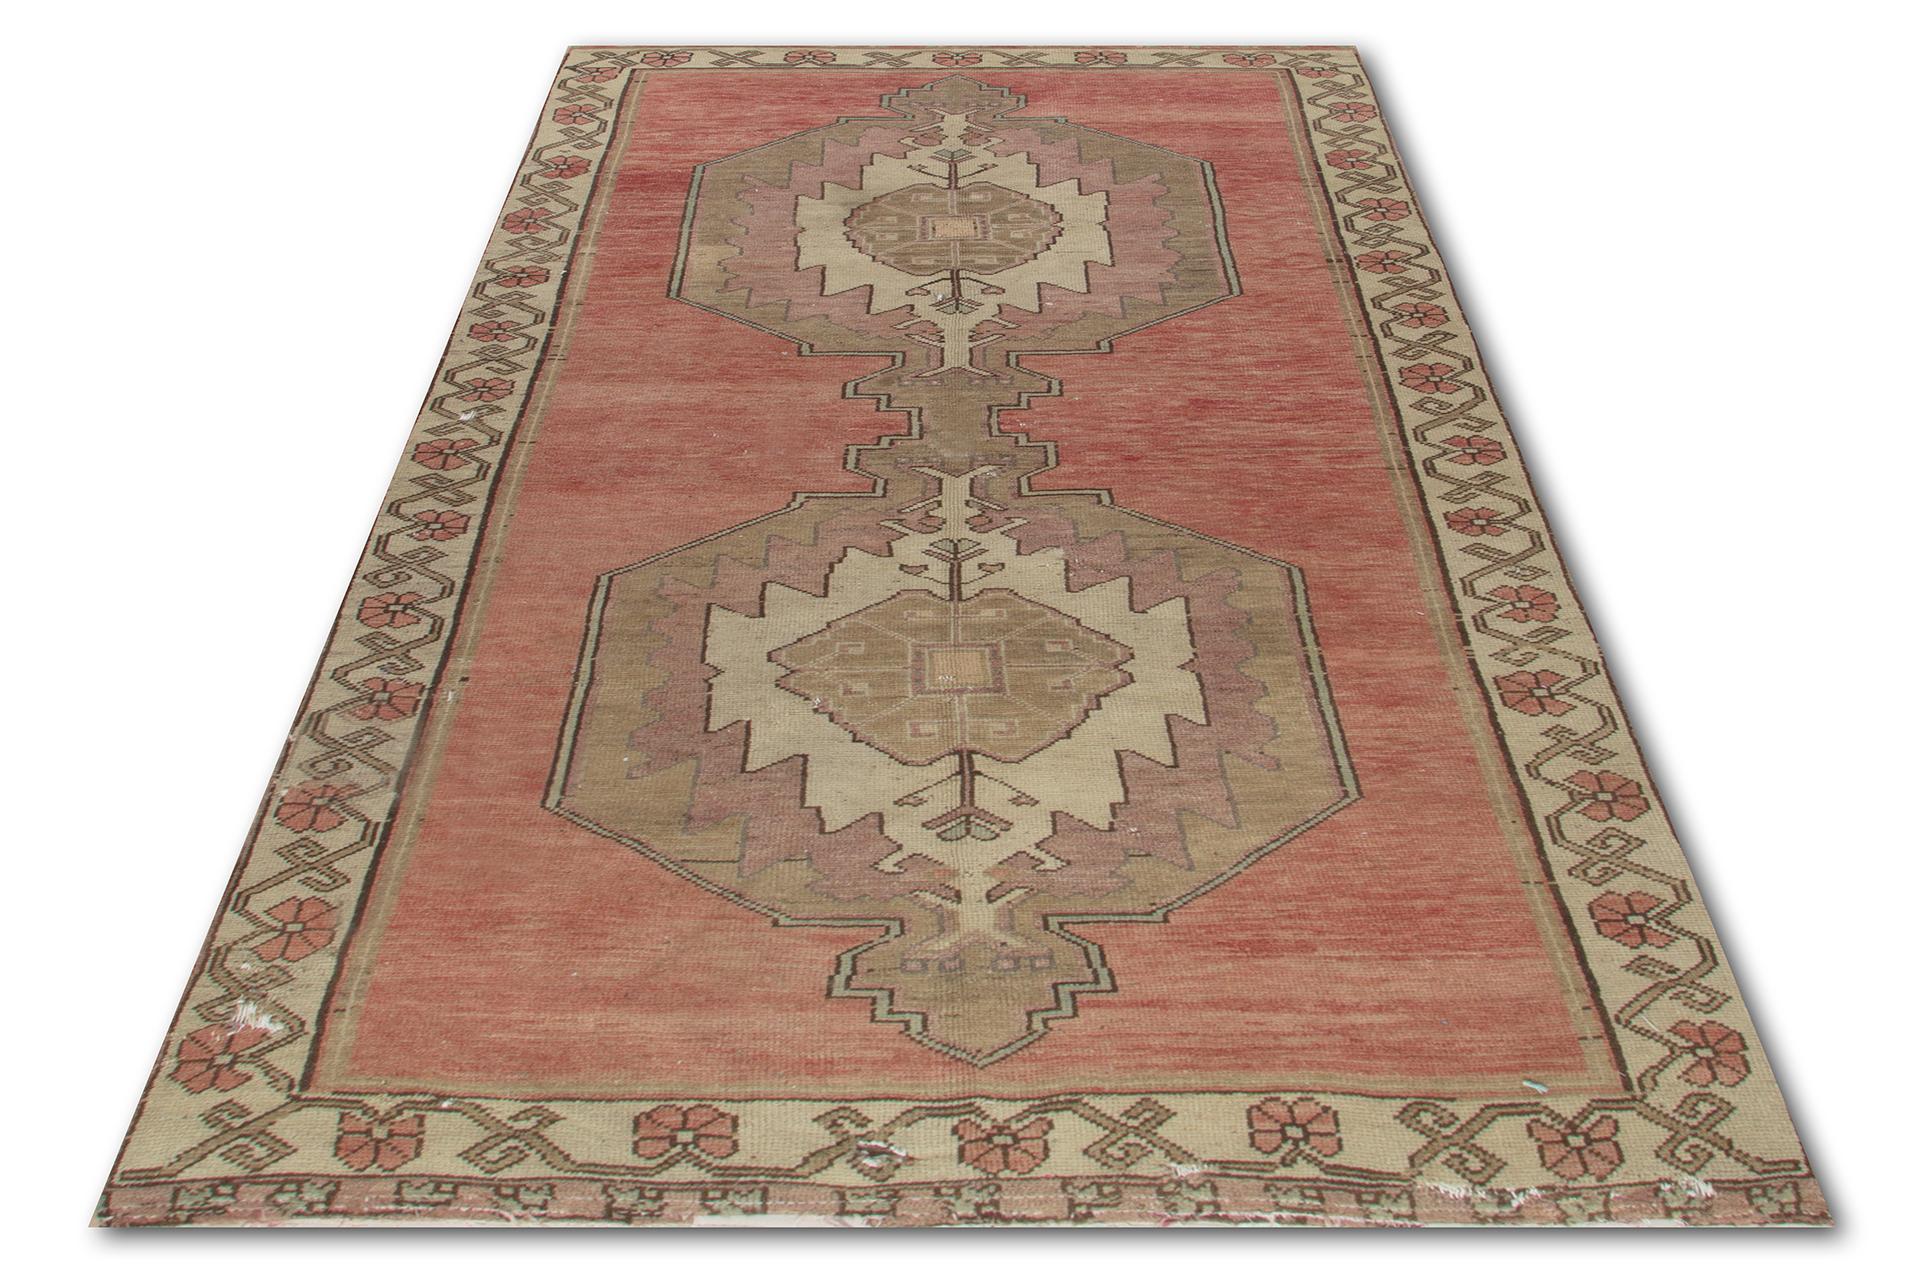 A vintage Turkish rug with medium to low wool pile, hand-knotted in the 1960s with a design of linked double medallions against a plain field in faded red and a floral border.

The rug is in good condition, sturdy and clean as a brand new rug. It